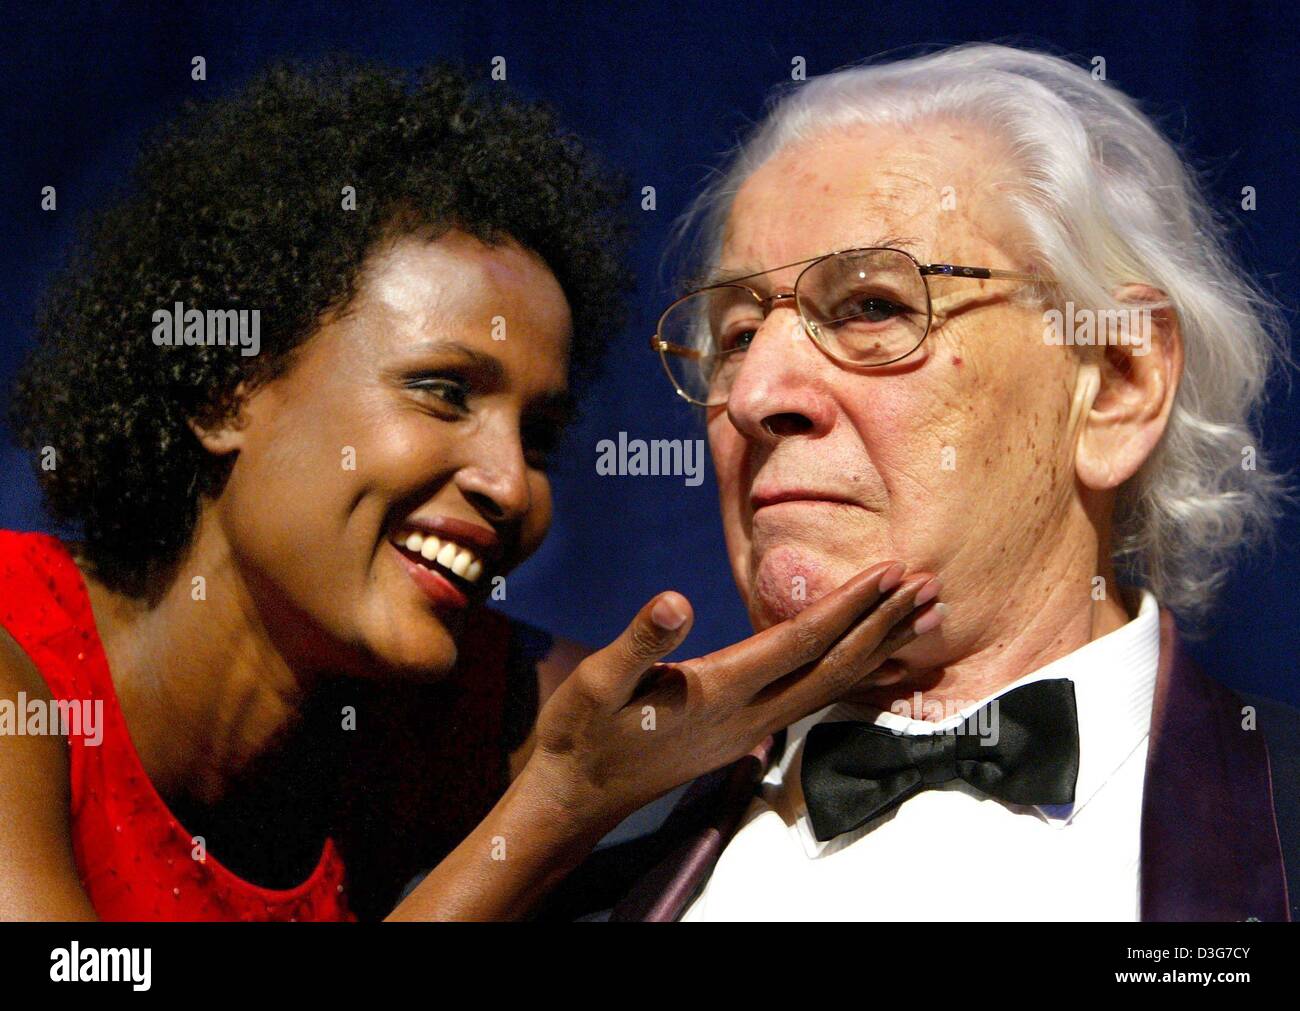 (dpa) - Top model and UNICEF ambassador Waris Dirie from Somalia tickles Sir Peter Ustinov, Unicef representative and patron of the evening, under the chin during the UNESCO Children's Fund benefit gala held at a hotel in Neuss, Germany, 8 November 2003. At the gala Waris Dirie was awarded the UNESCO Children's Fund's 'Children's Pyramids Award' for her fight for women's rights and Stock Photo